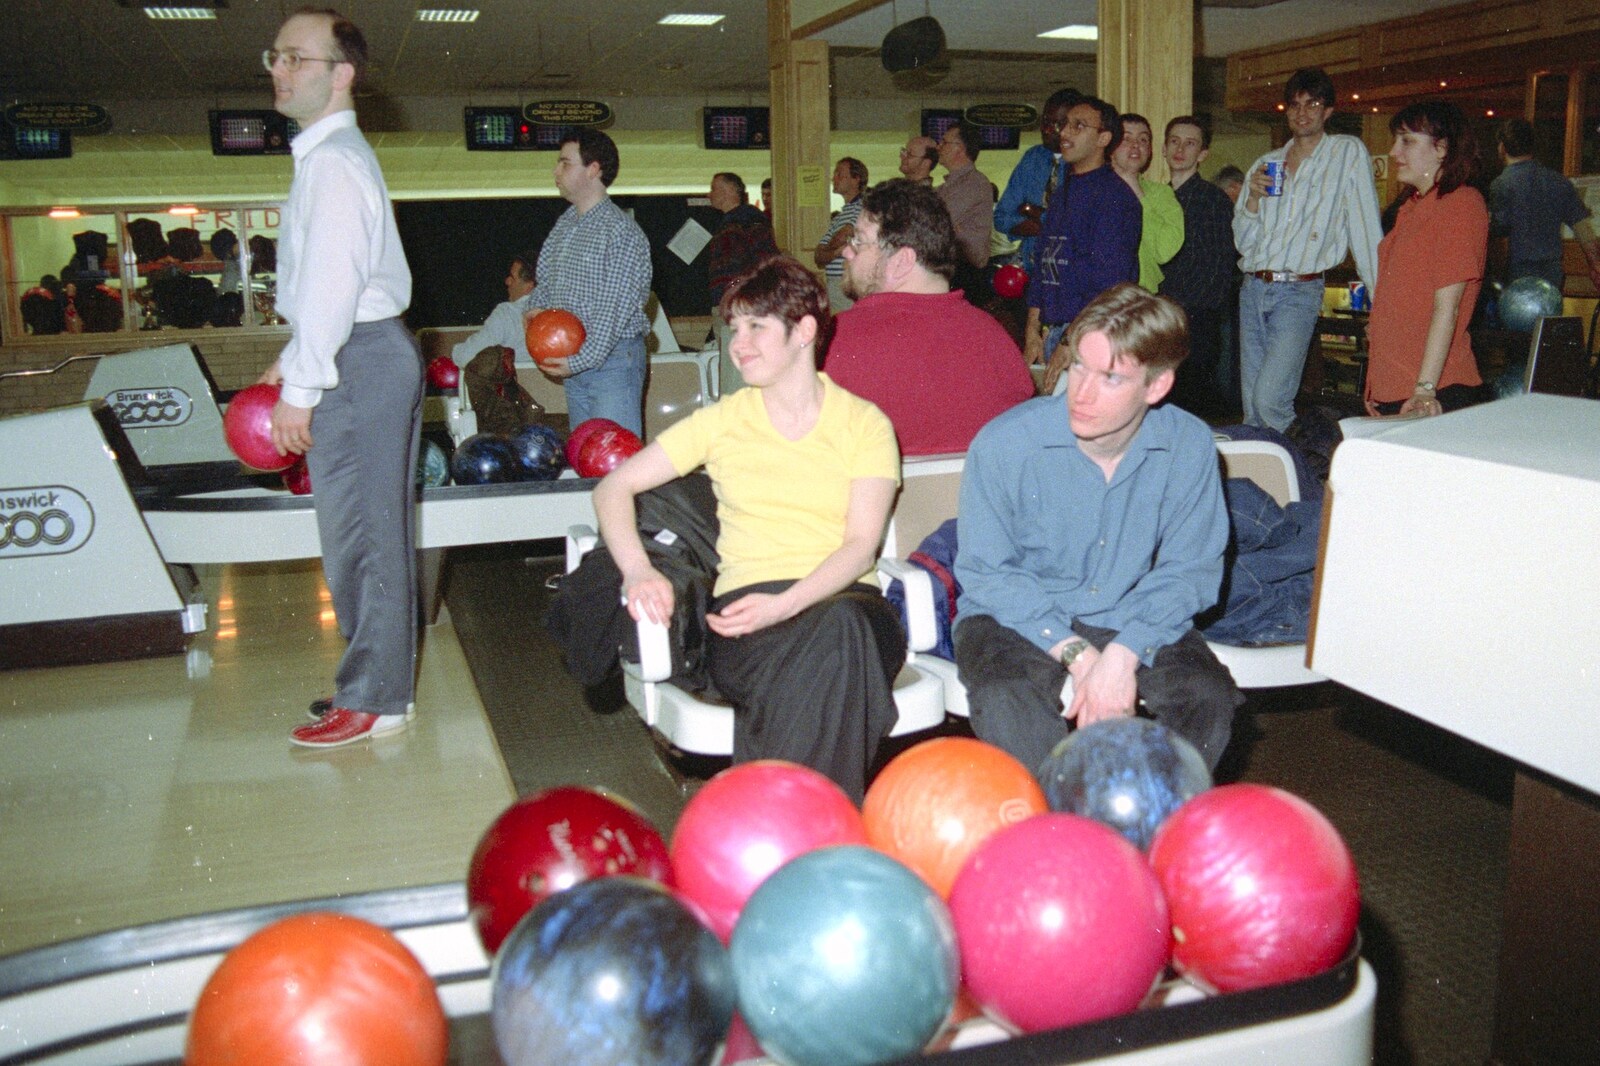 Guy Girardeau watches his ball as it heads down the lane from Dougie's Birthday and Adrian Leaves CISU, Ipswich, Suffolk - 29th June 1997